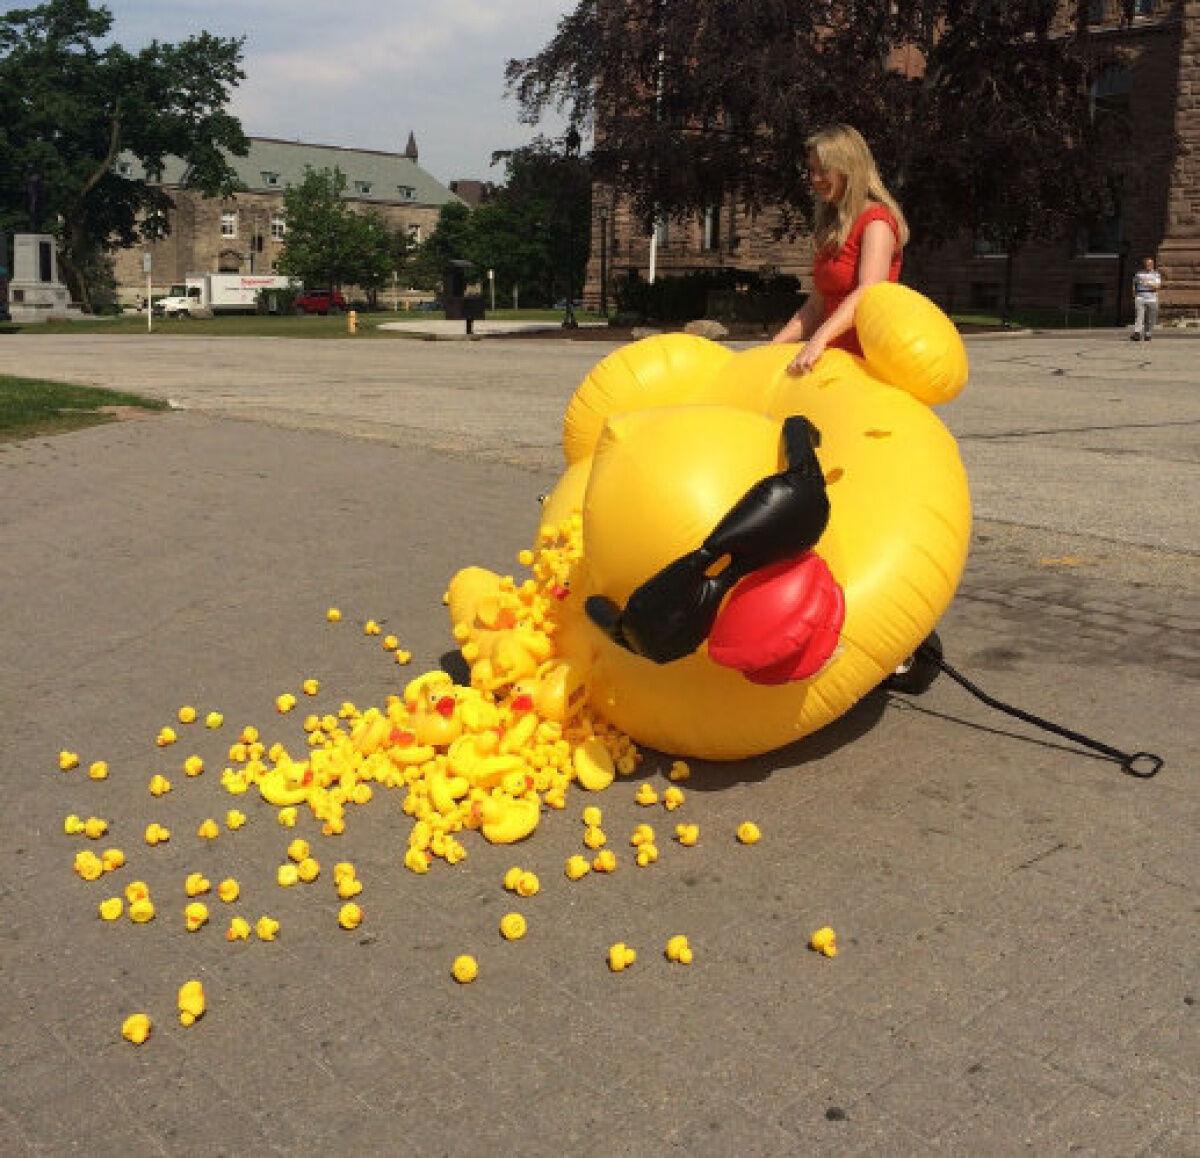 Taxpayers federation protests giant rubber duck, calls it a 'waste of taxpayer  money